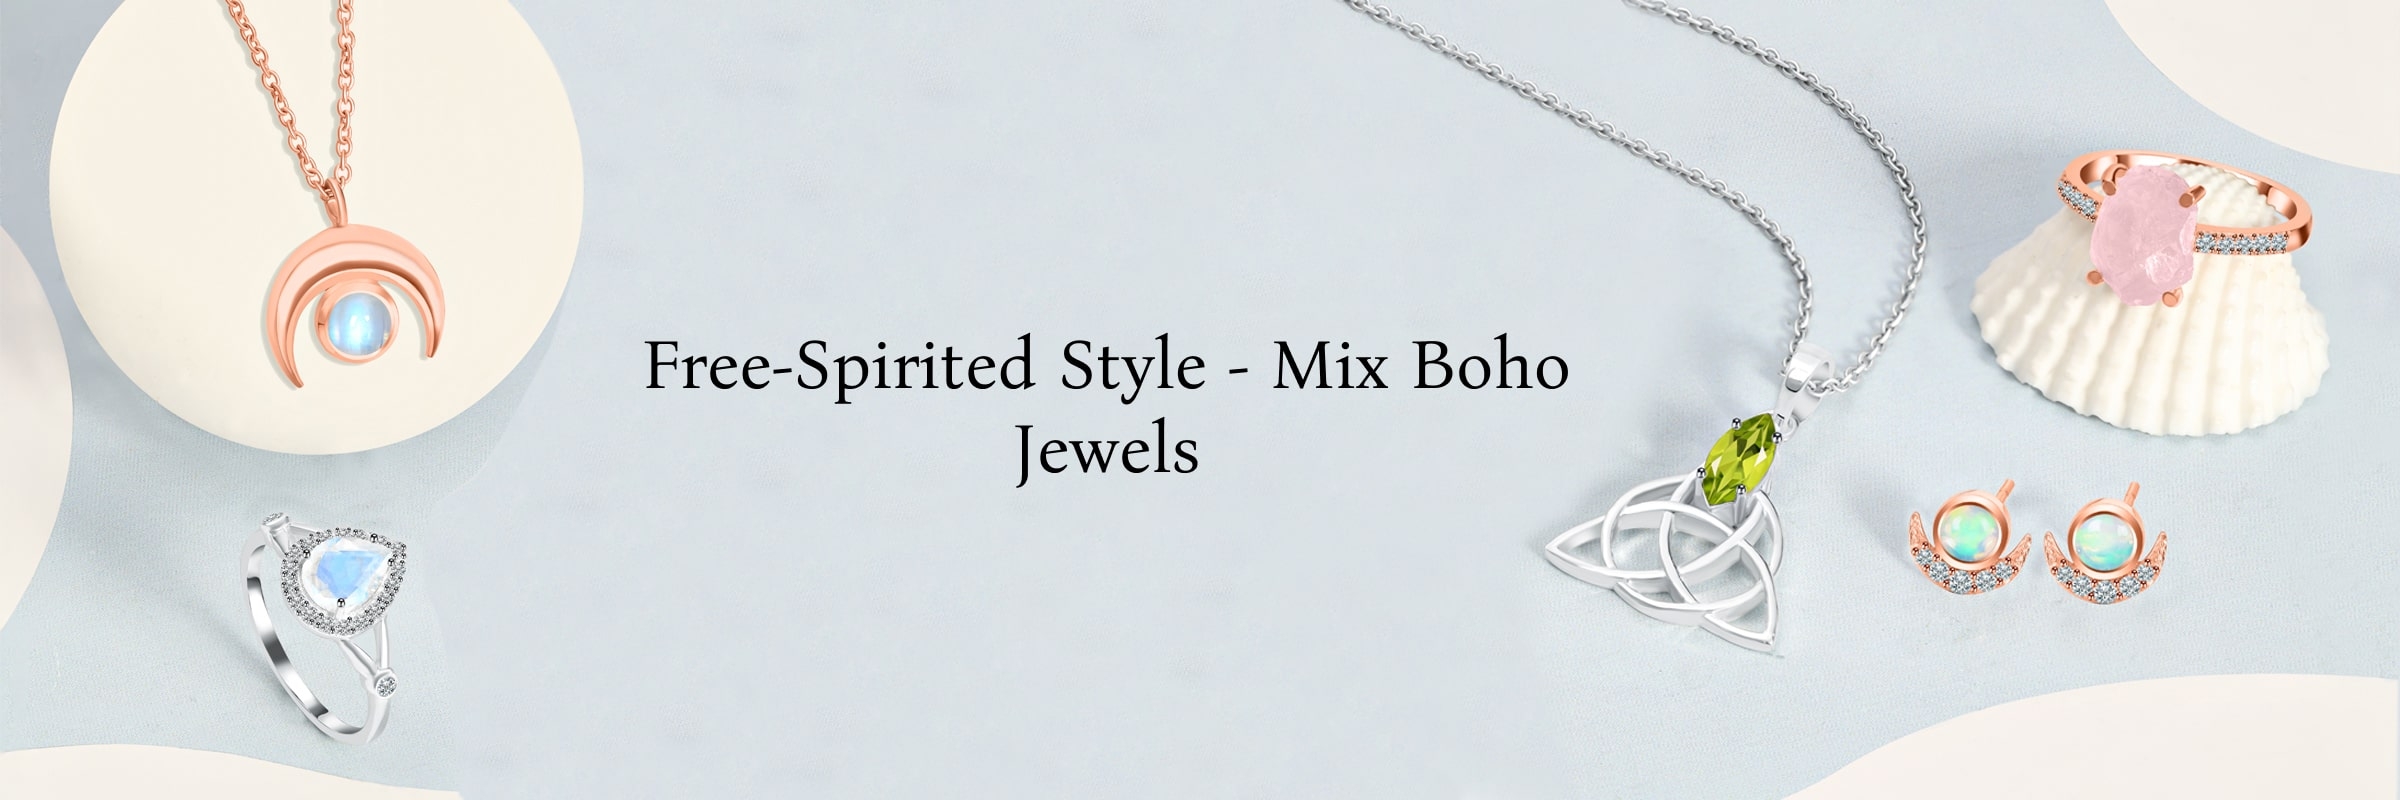 How to Mix And Match Boho Jewelry